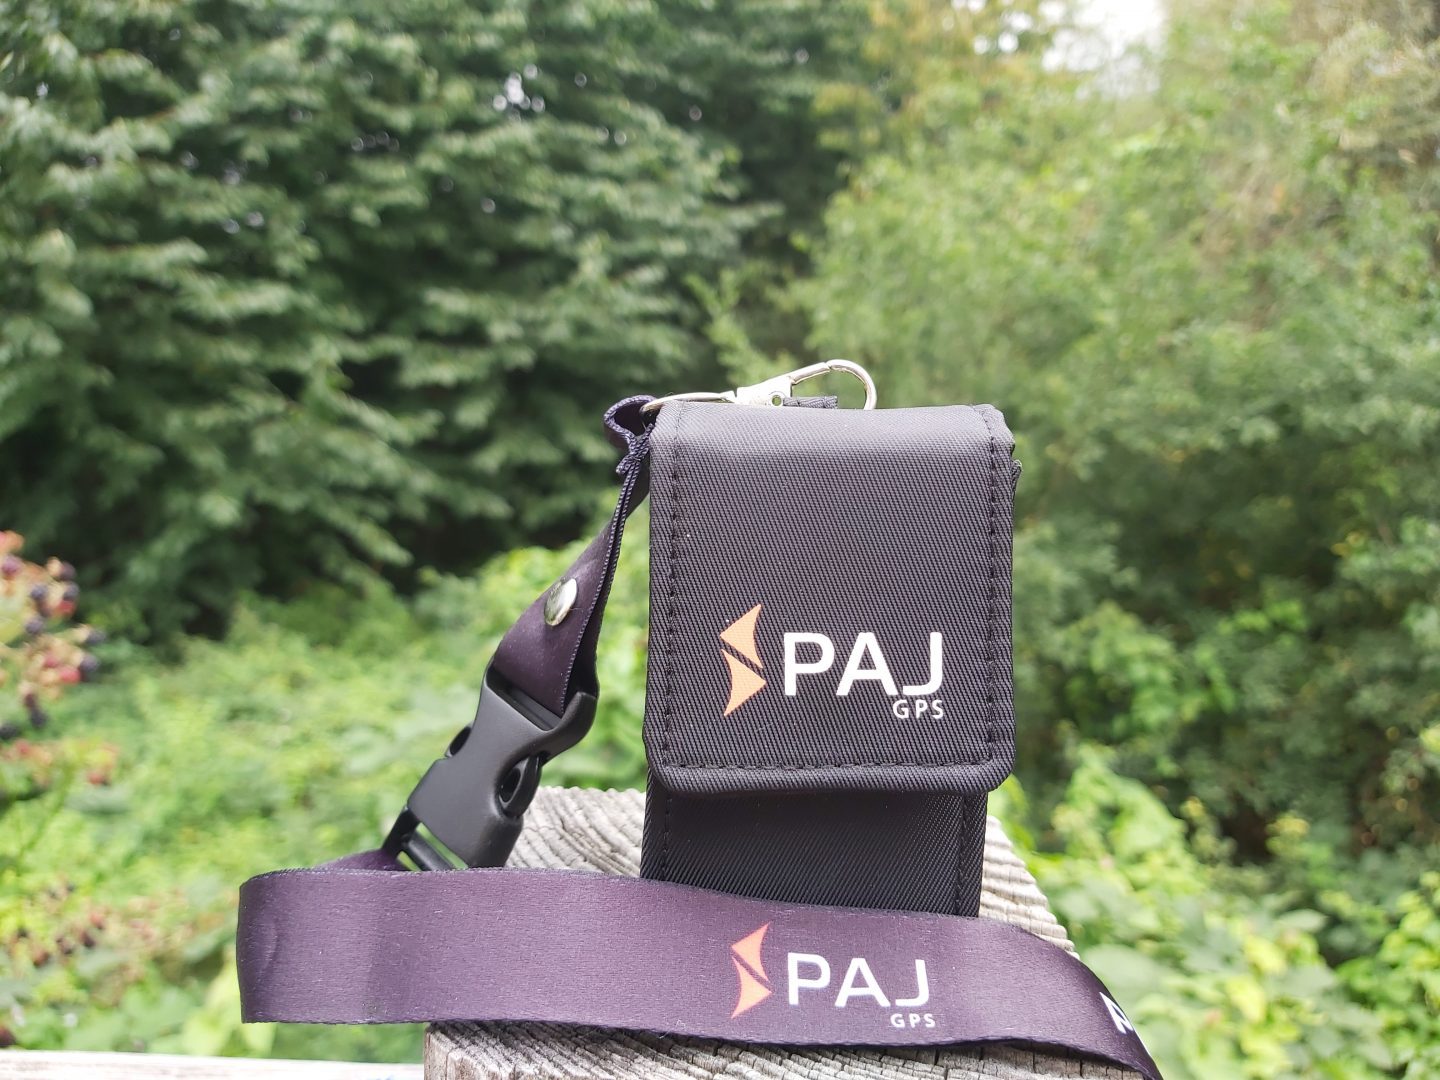 PAJ Easy Finder GPS Tracker in case with lanyard attached with trees in background